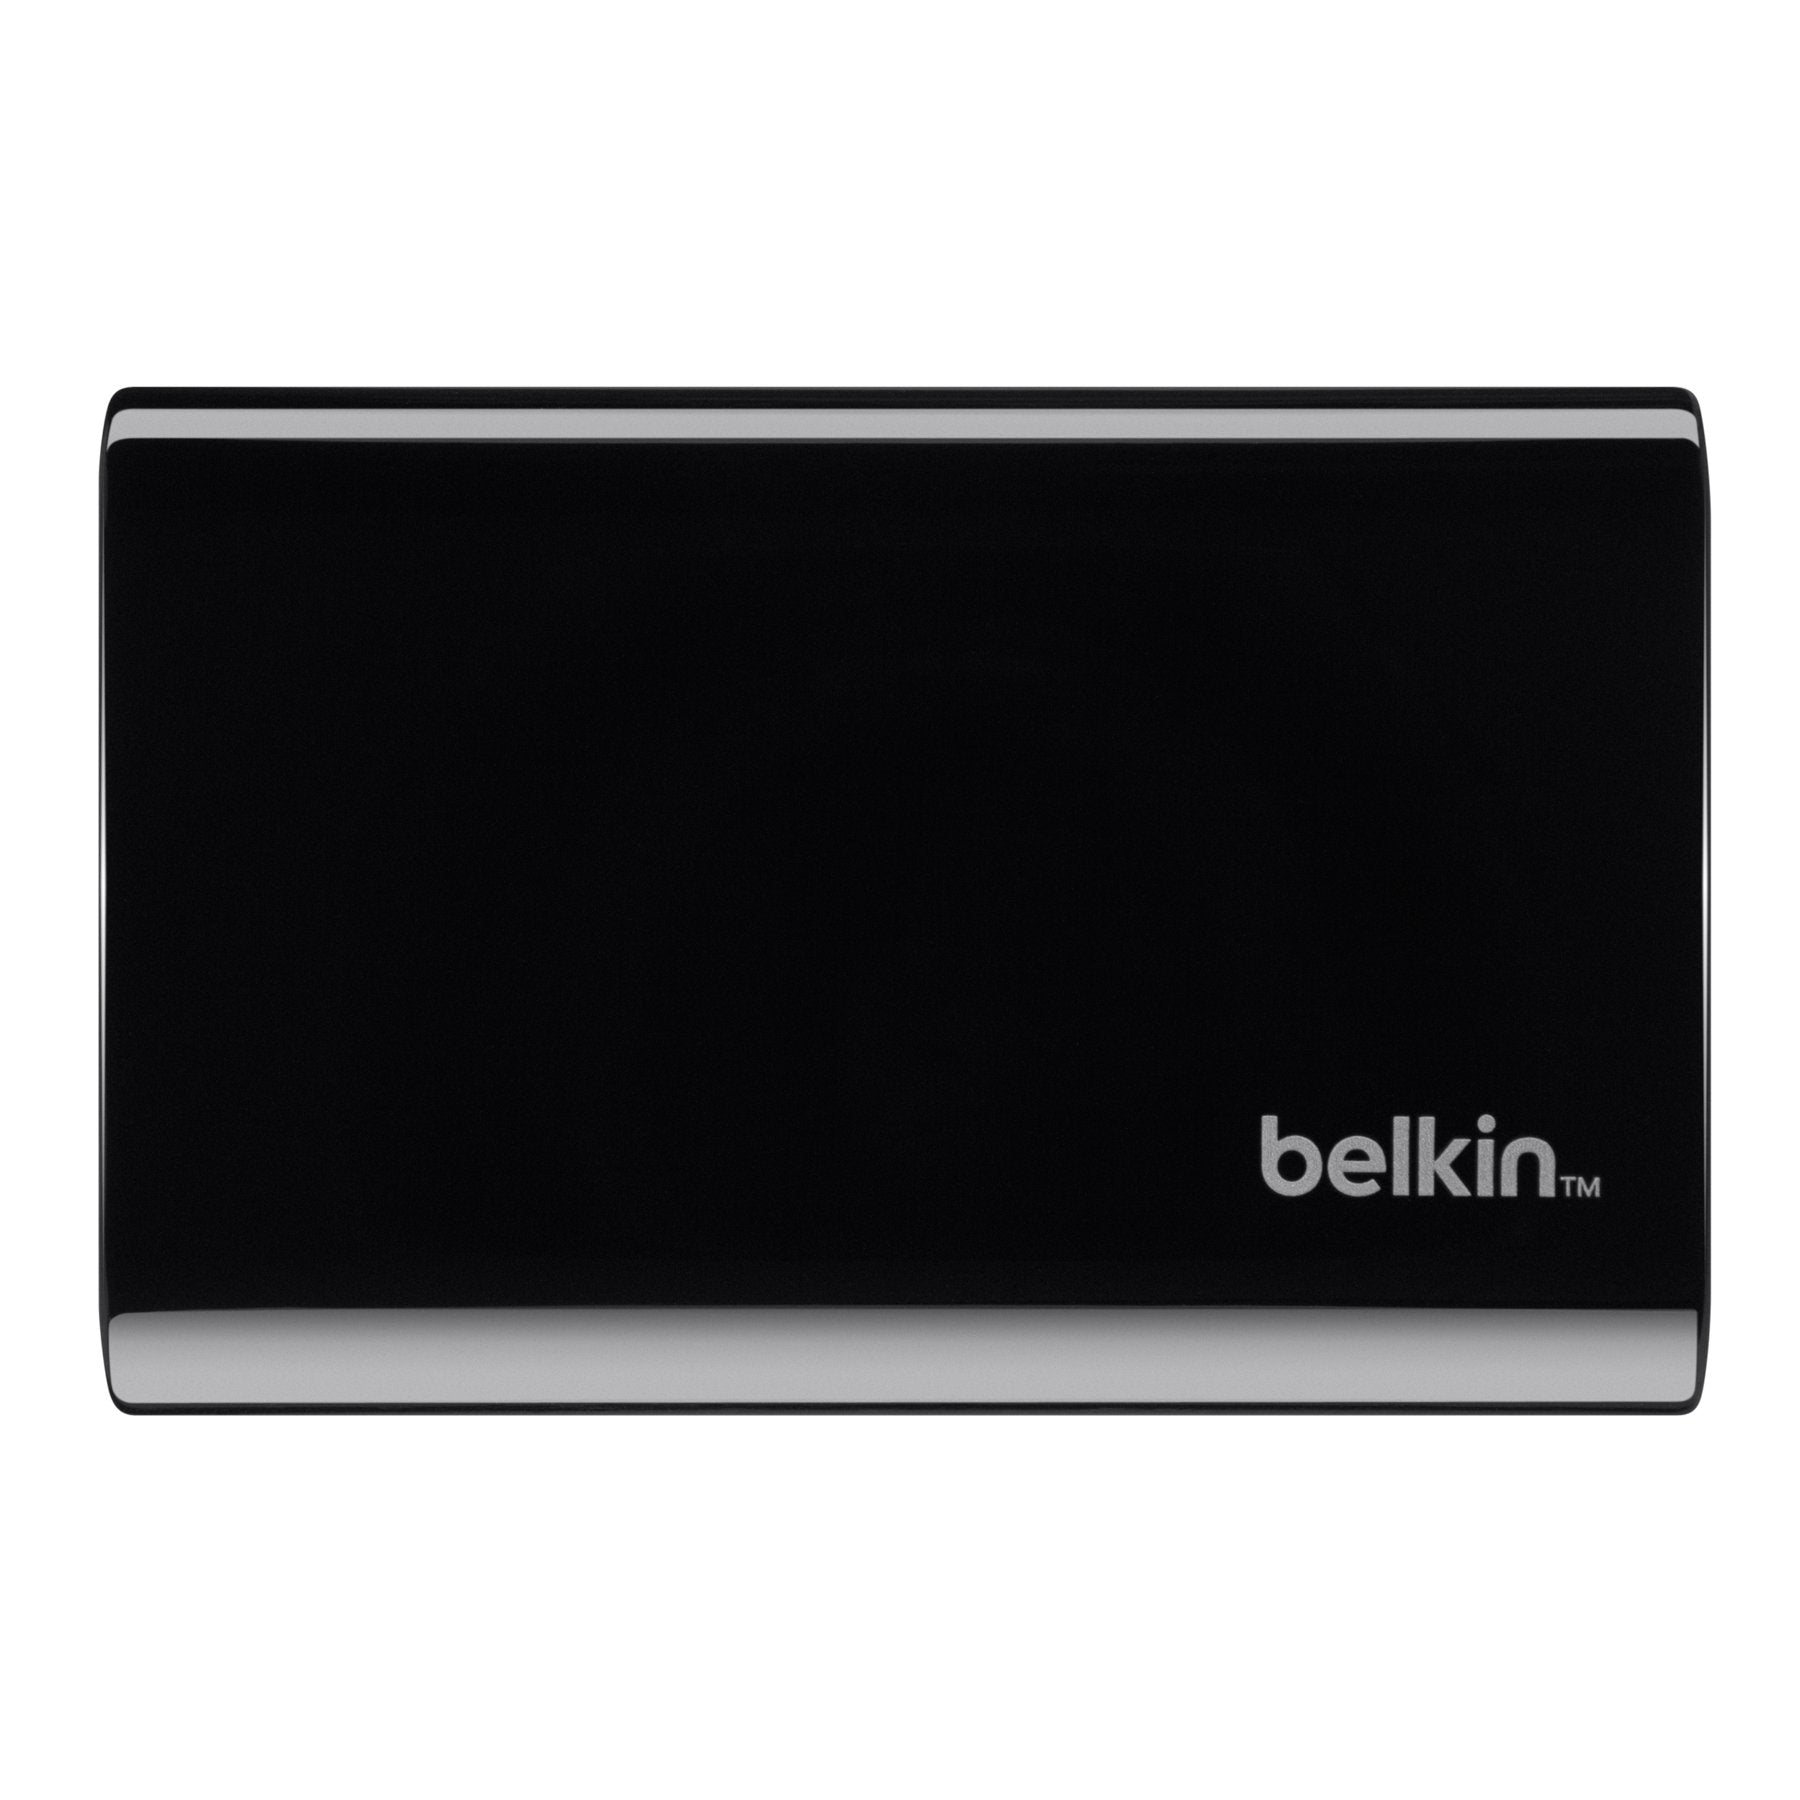 Belkin USB 3.0 to HDMI Adapter for Ultrabooks and Tablets